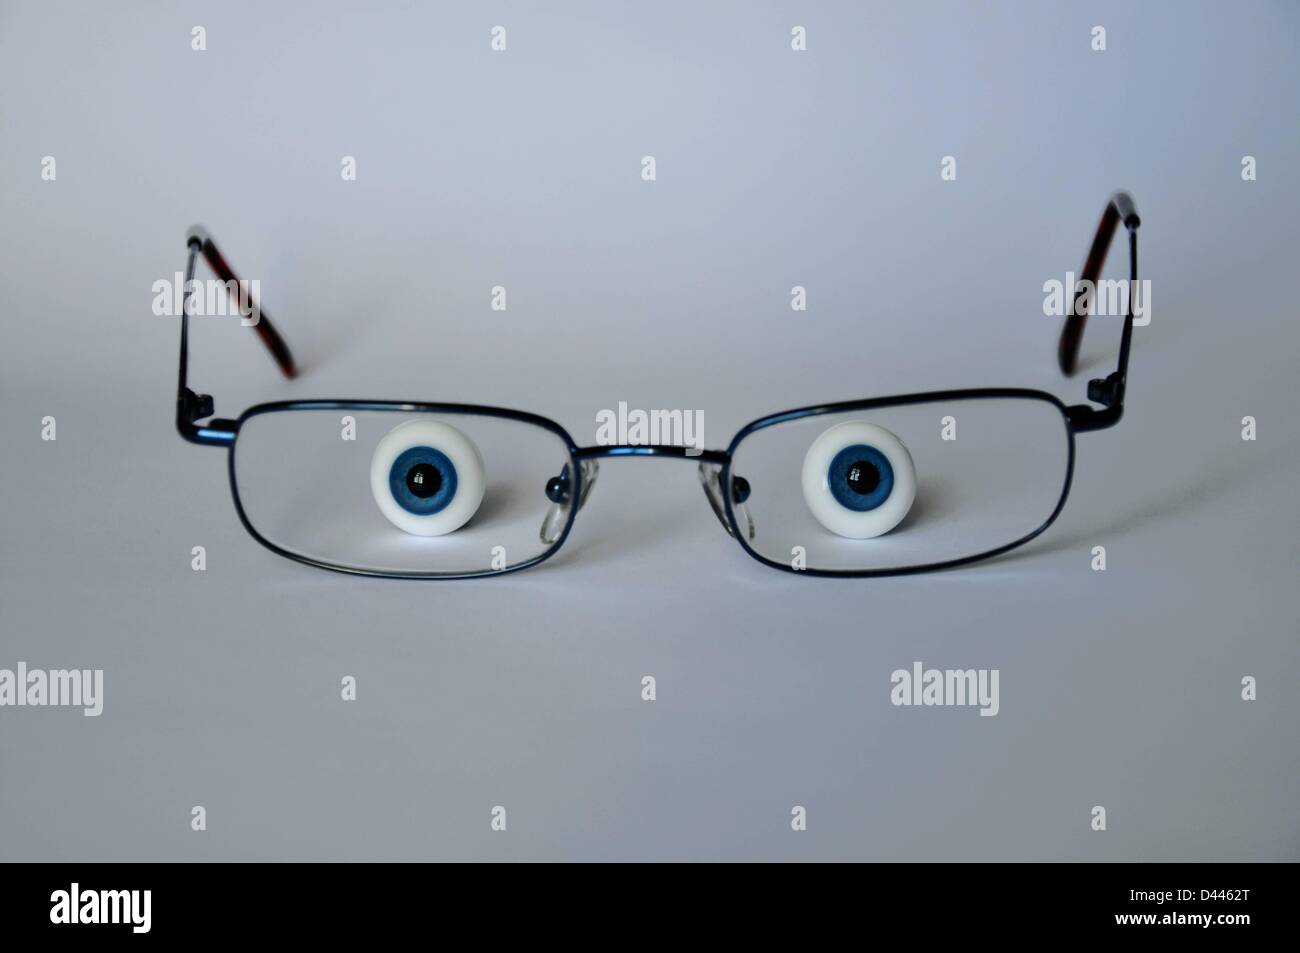 Illustration - Two glass eyes are pictured on a table looking through glasses in Berlin, Germany, 3 June 2011. Fotoarchiv für ZeitgeschichteS.Steinach Stock Photo